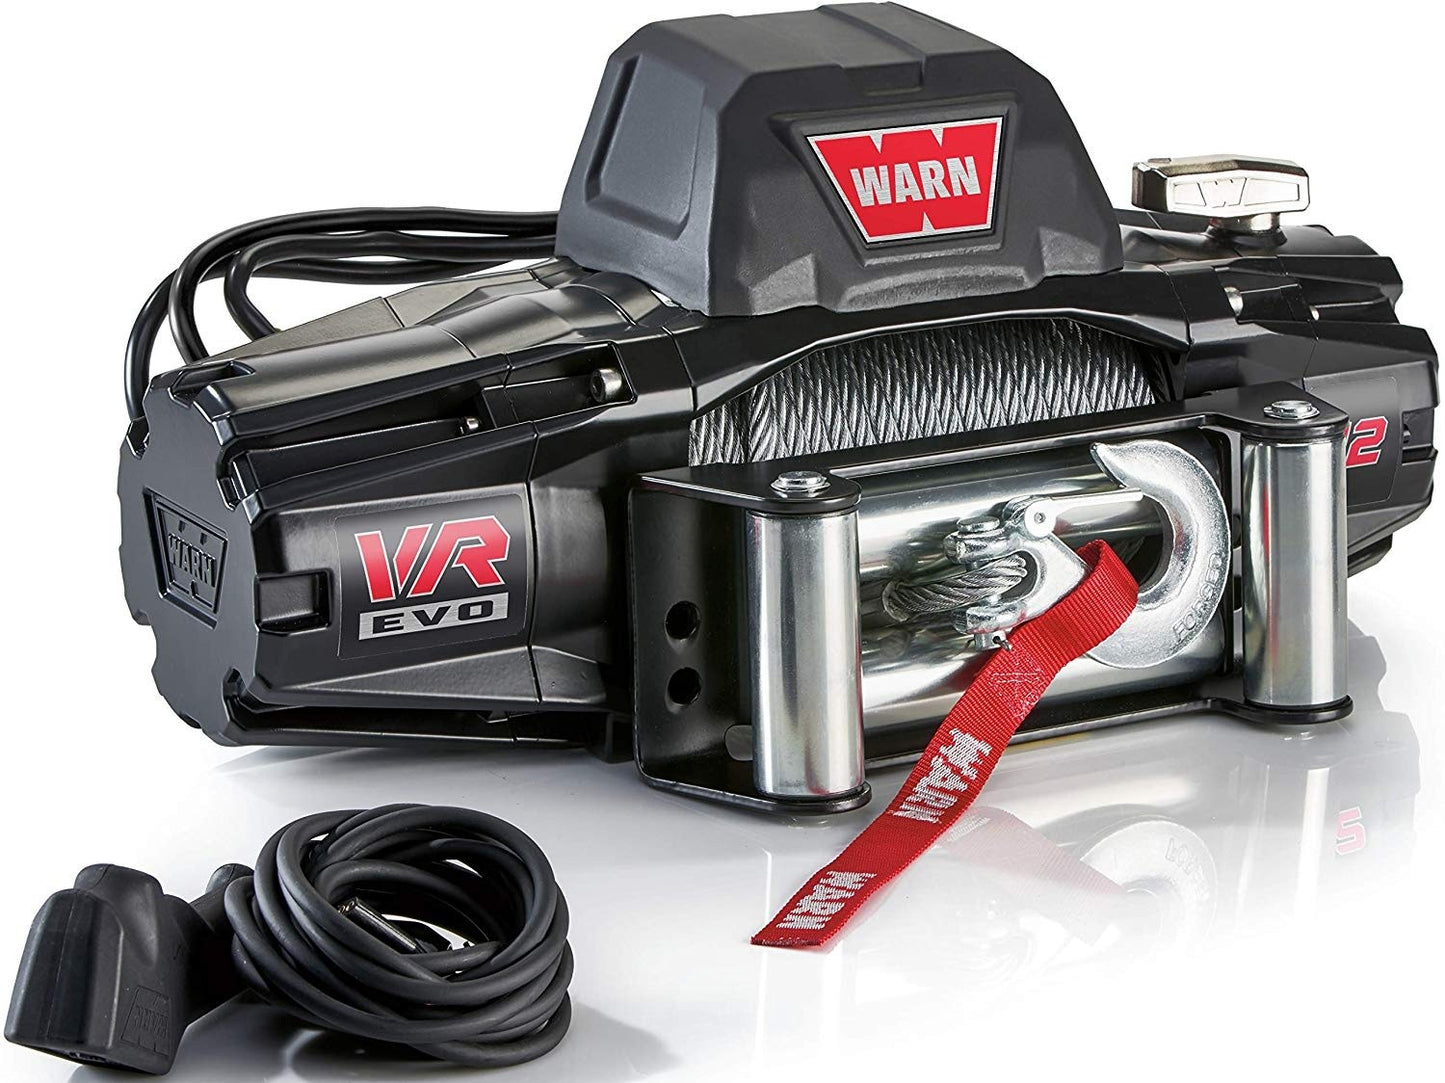 Warn VR EVO 10s 10,000 lbs Winch with Synthetic Rope & Wireless Remote